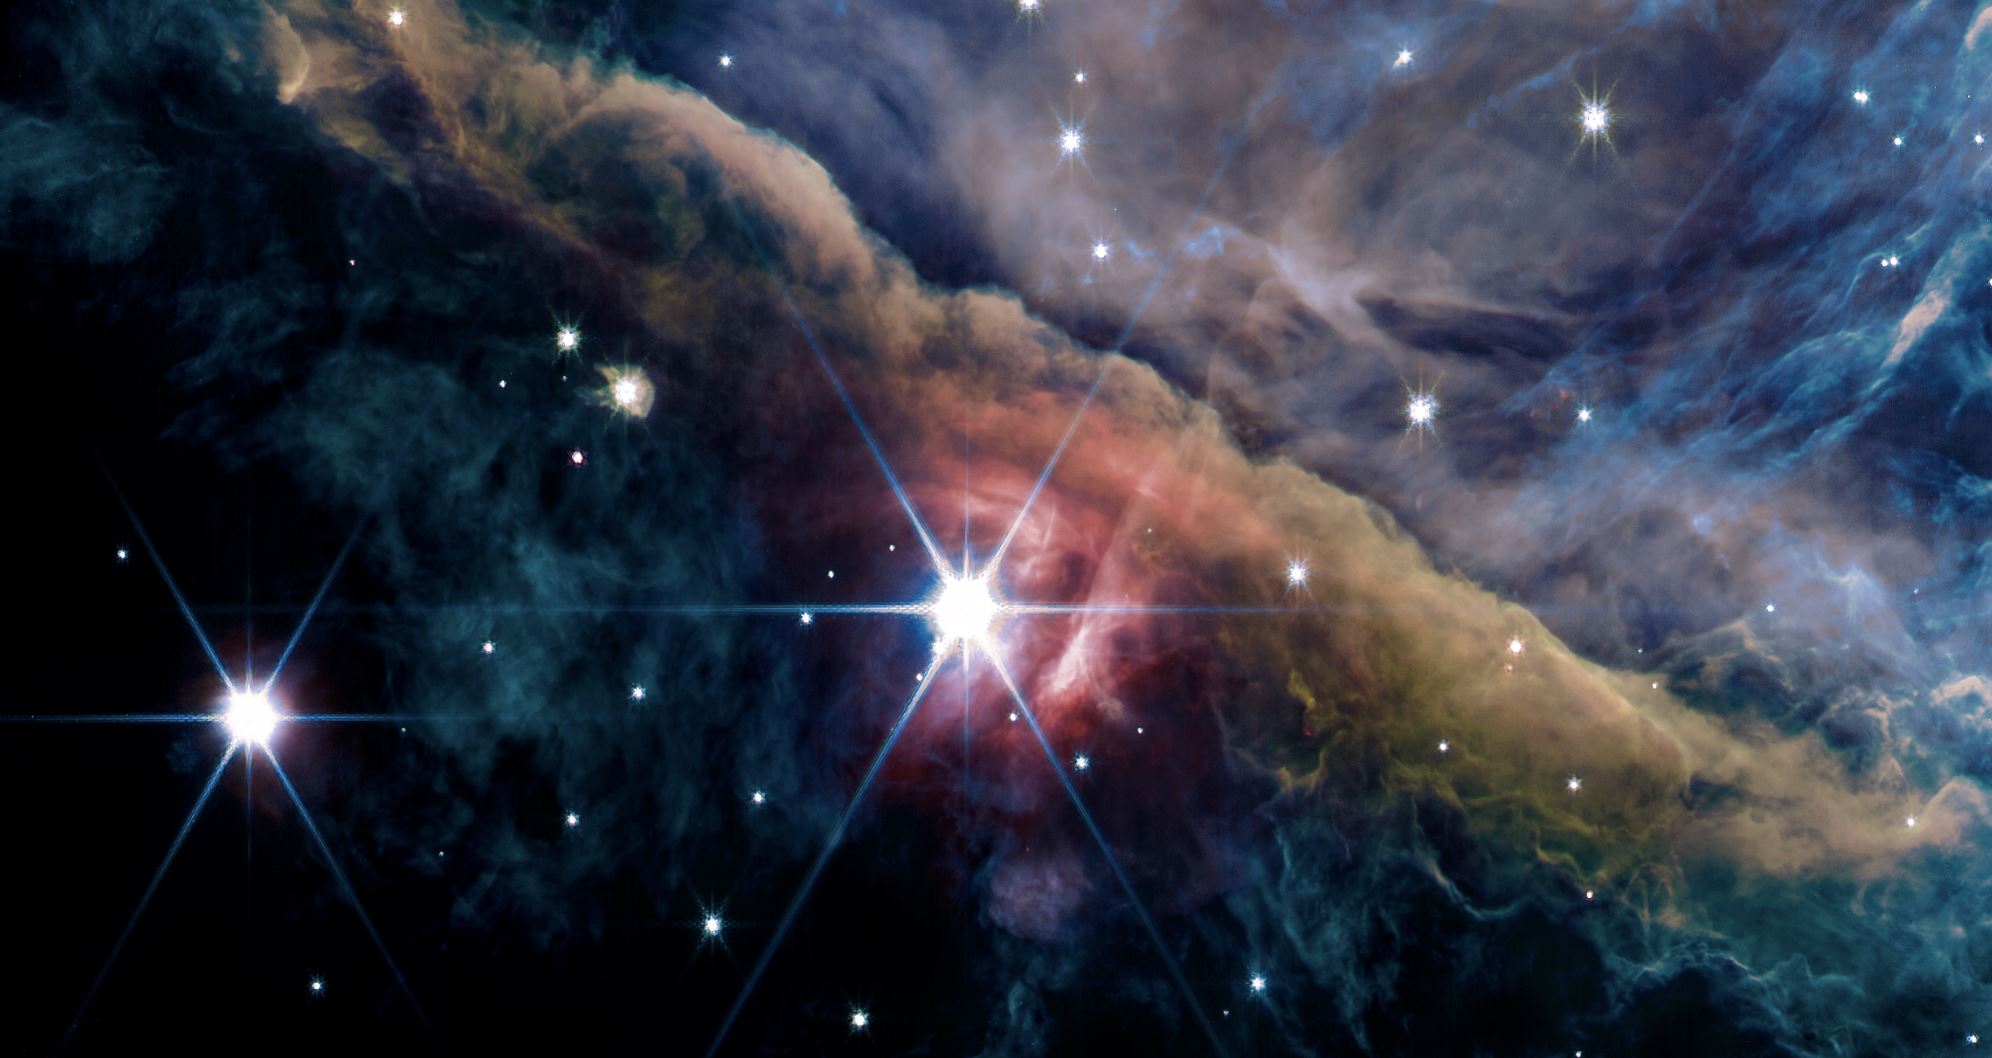 Cropped version of the James Webb Photograph of the Inner Orion Nebula. Image Credit: NASA, ESA, CSA, Data reduction and analysis : PDRs4All ERS Team; graphical processing S. Fuenmayor.